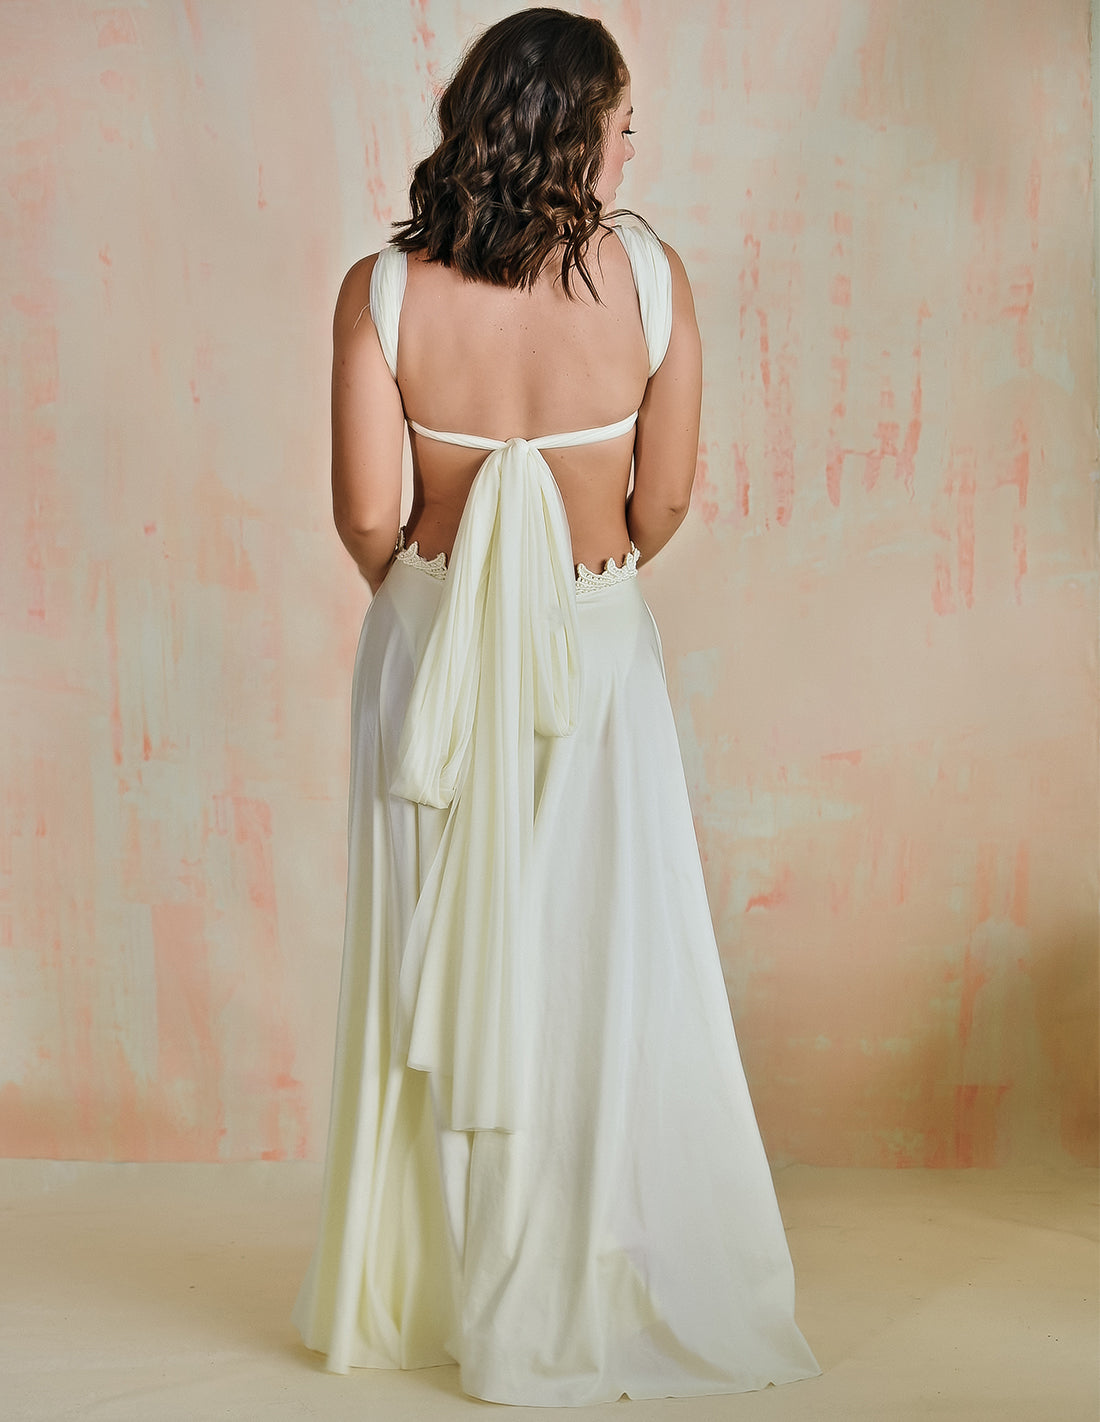 Wings Dress Ivory. Dress With Hand Woven Macramé In Ivory. Entreaguas